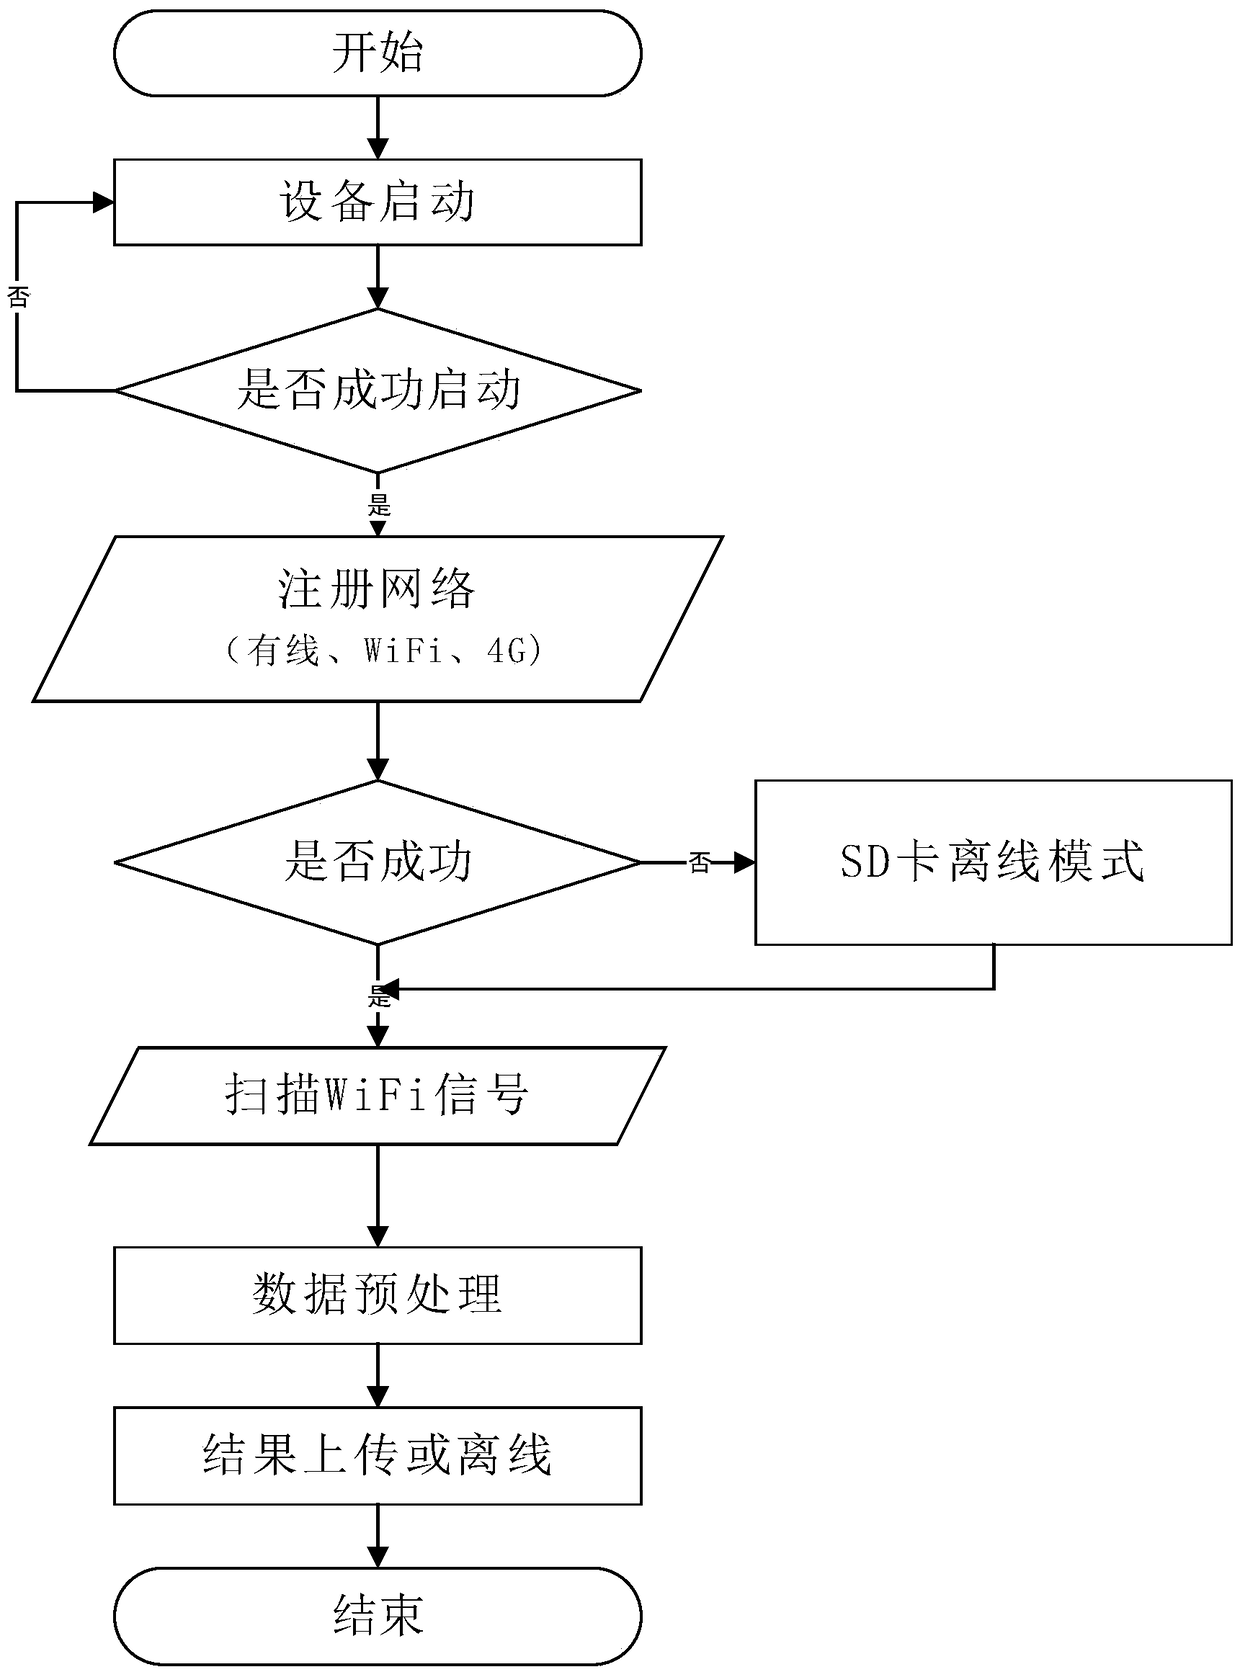 Method and system for statistical analysis and service of tourist flow based on WiFi probe